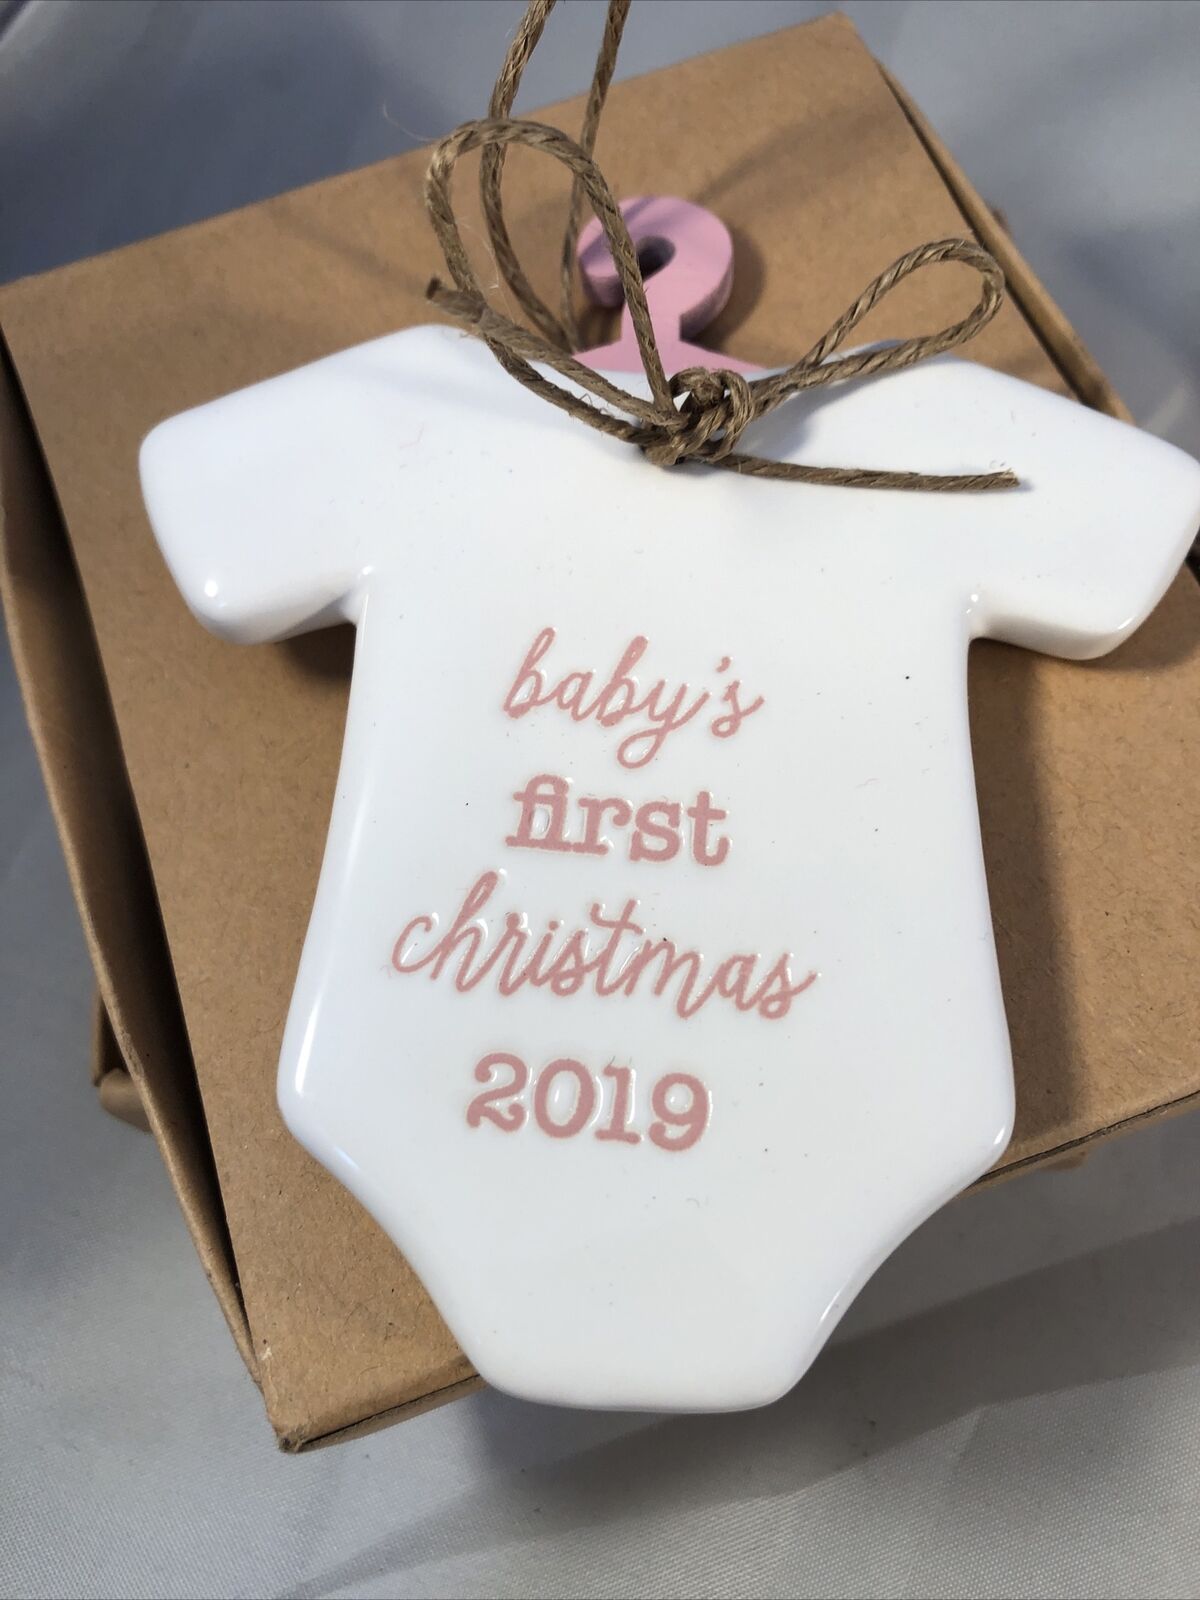 2019 Baby’s 1st Christmas Mud Pie Ornament Pink Writing Hanger